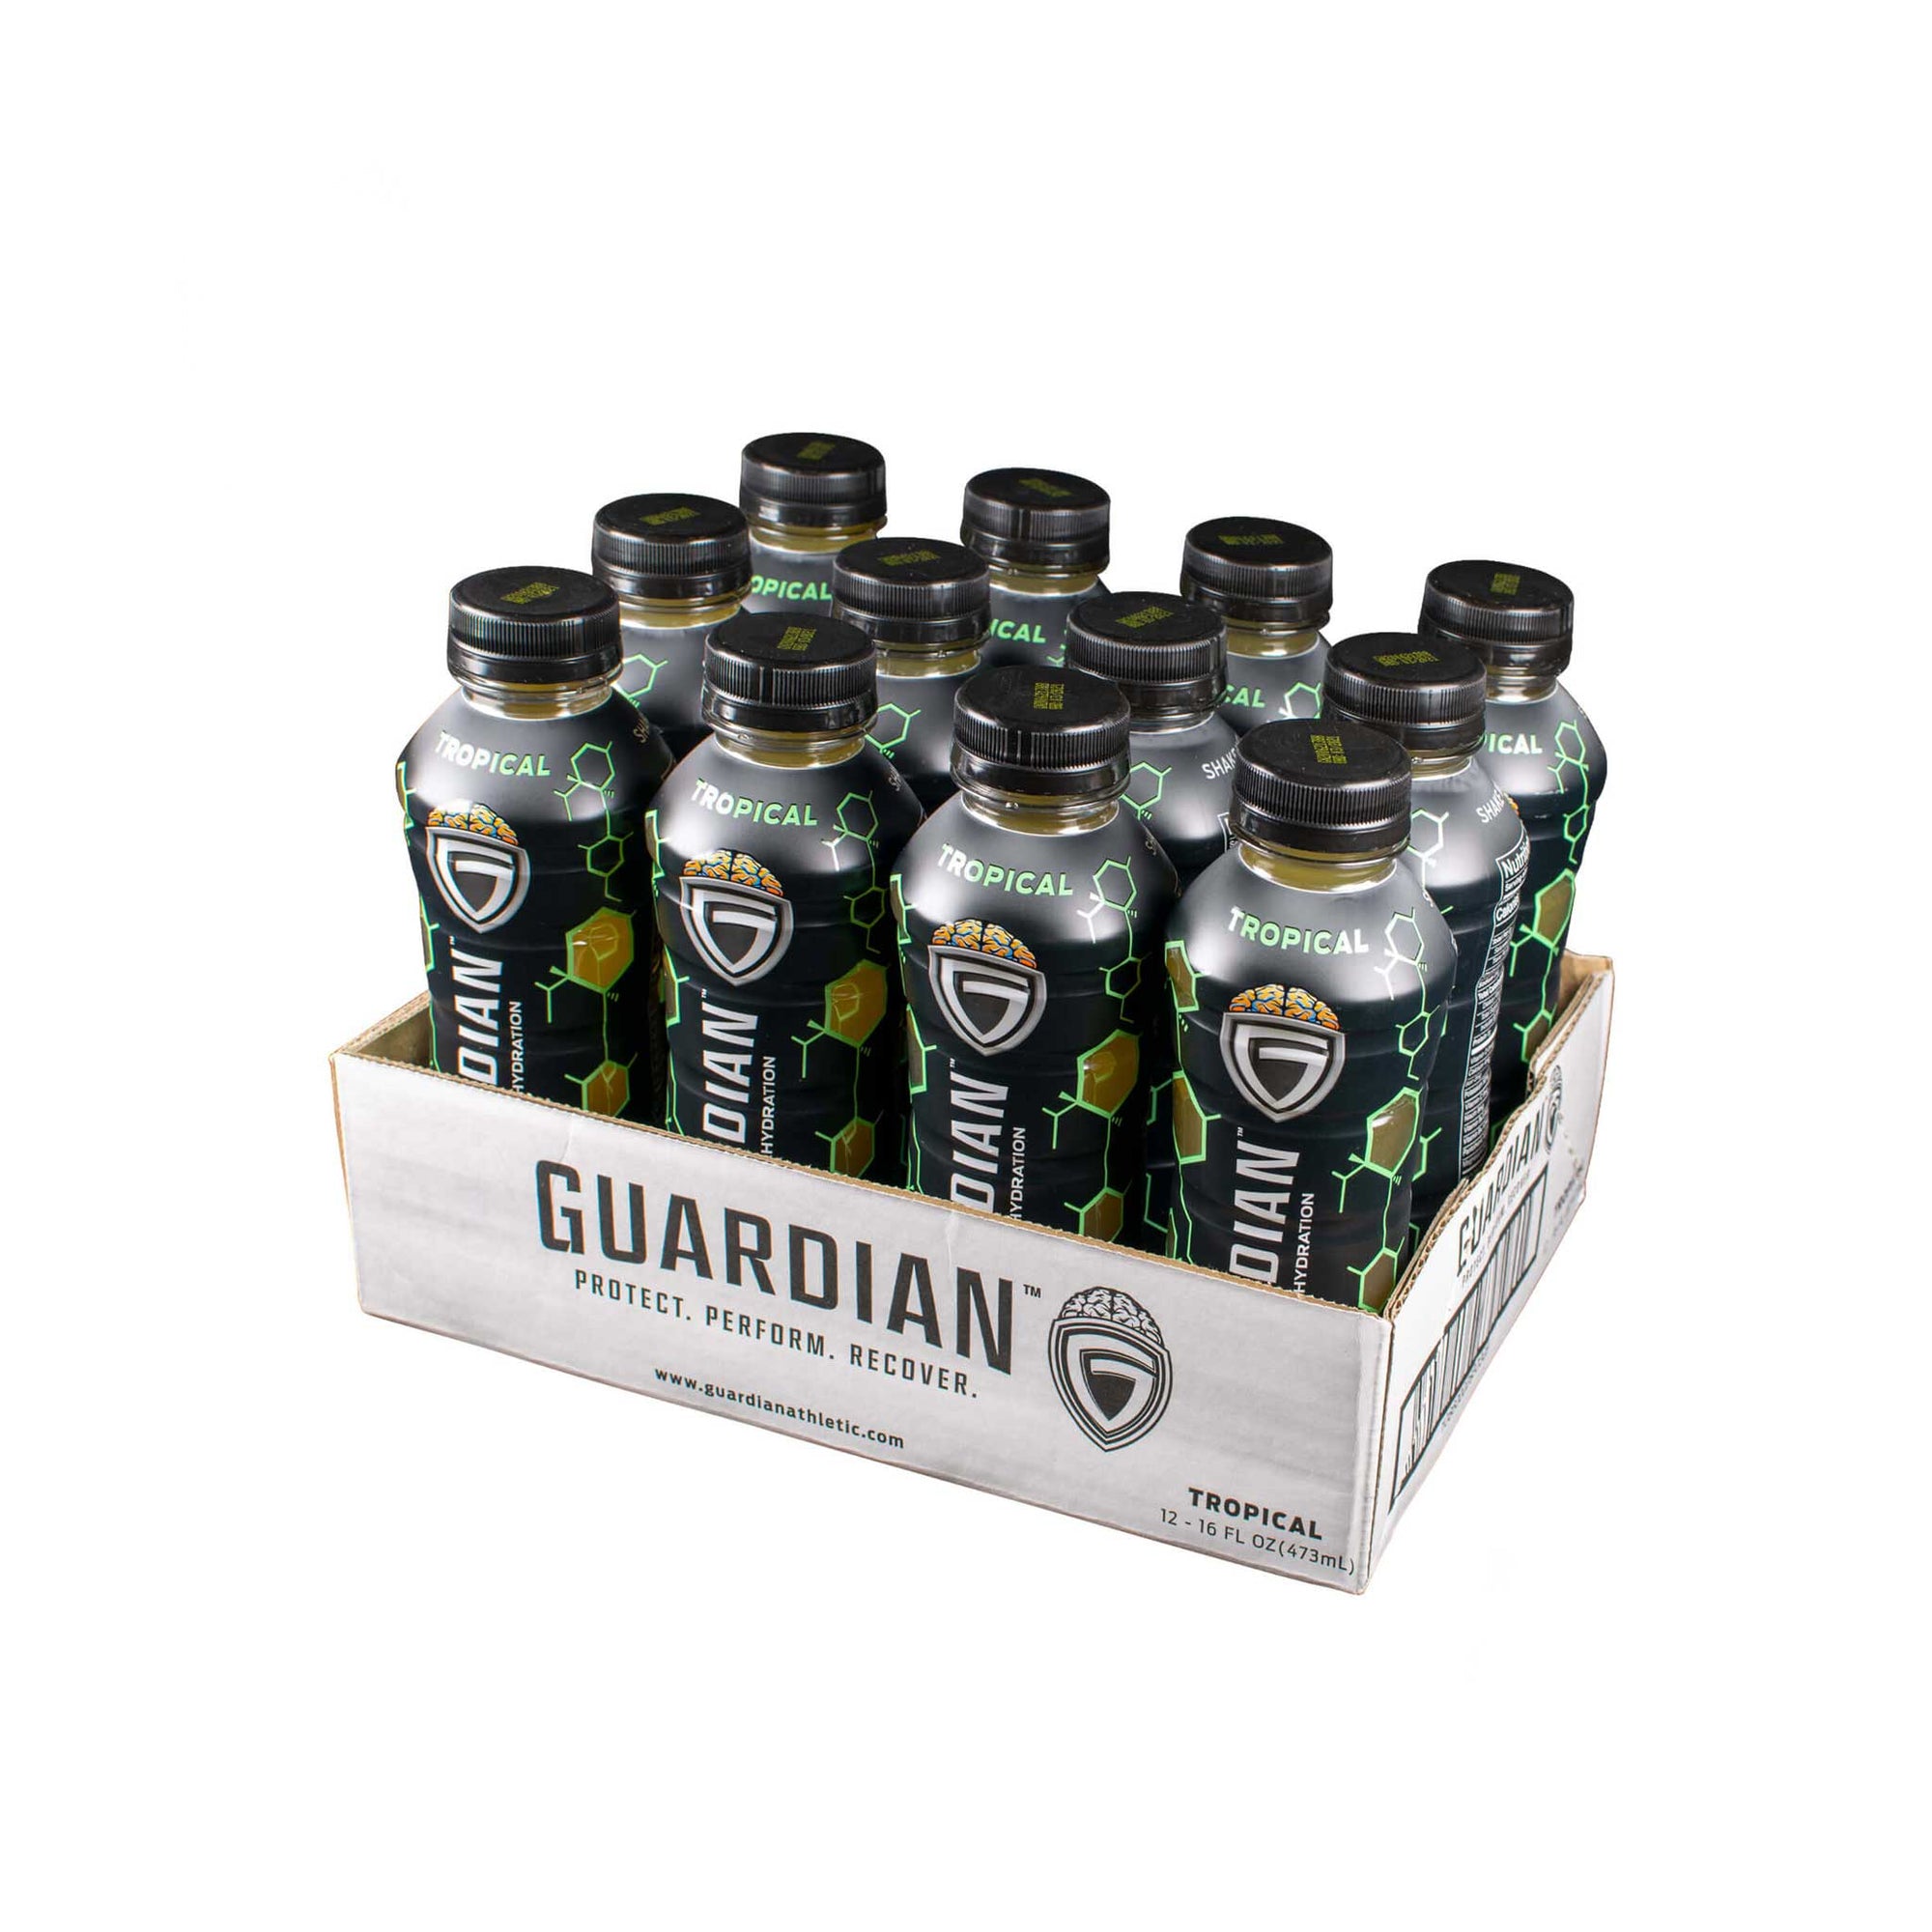 Guardian Athletic Rehydration Tropical 12 Pack